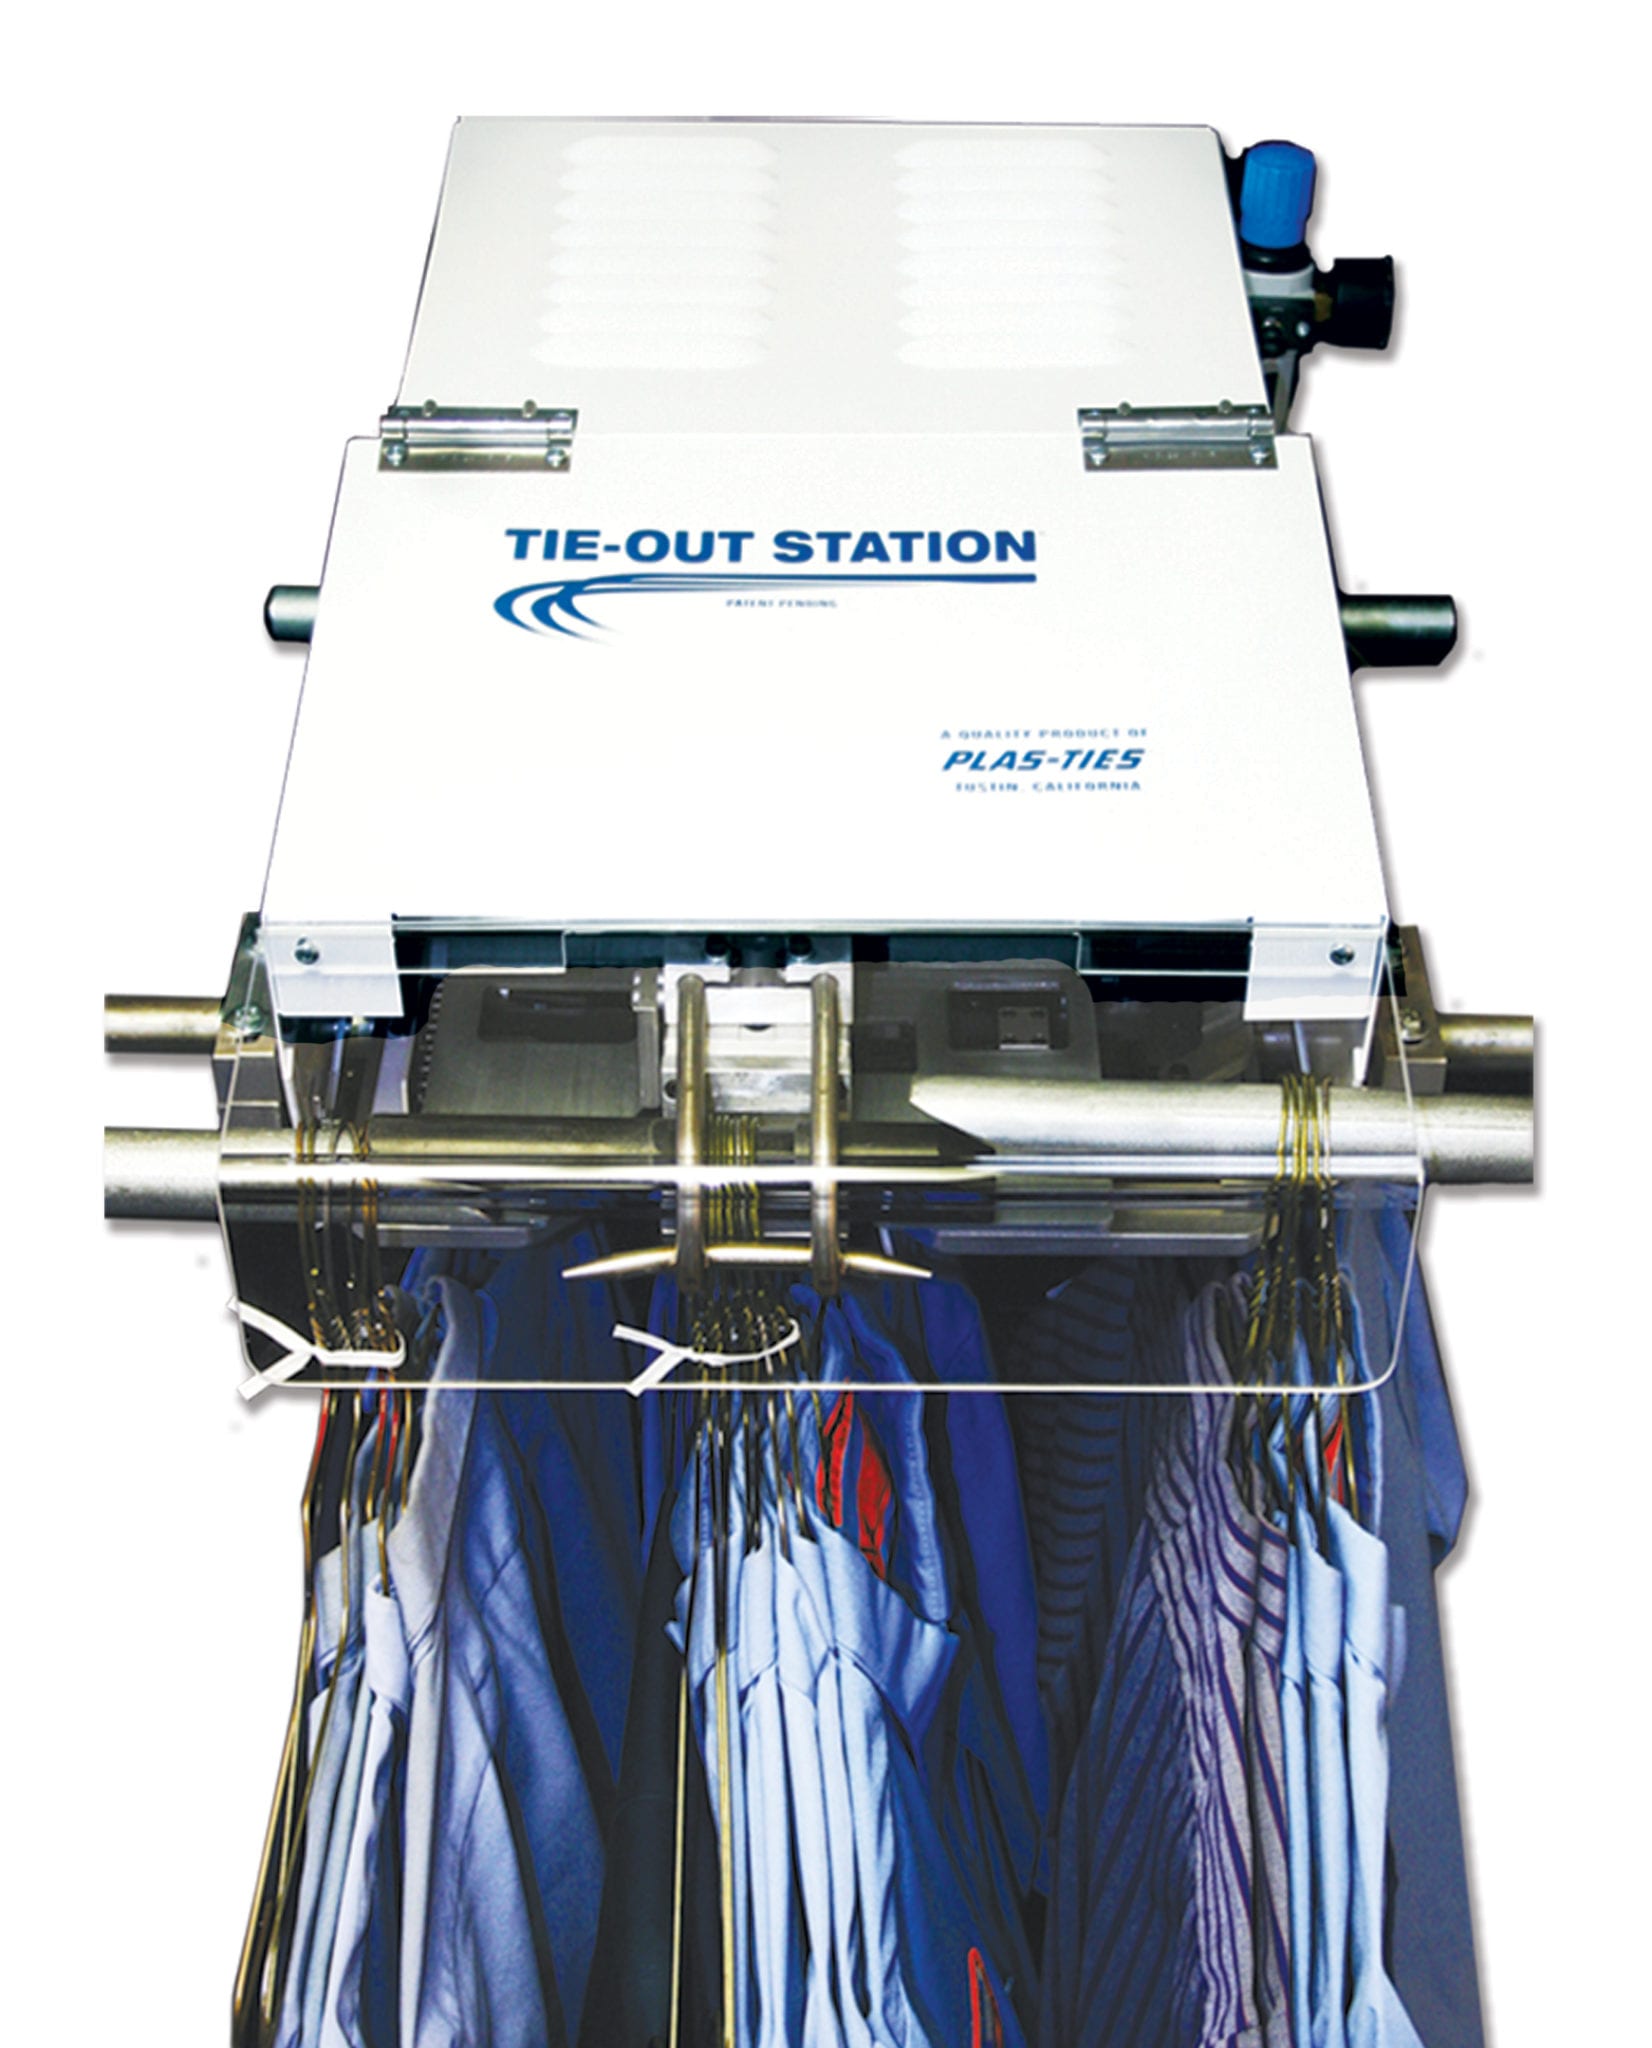 tie-out station